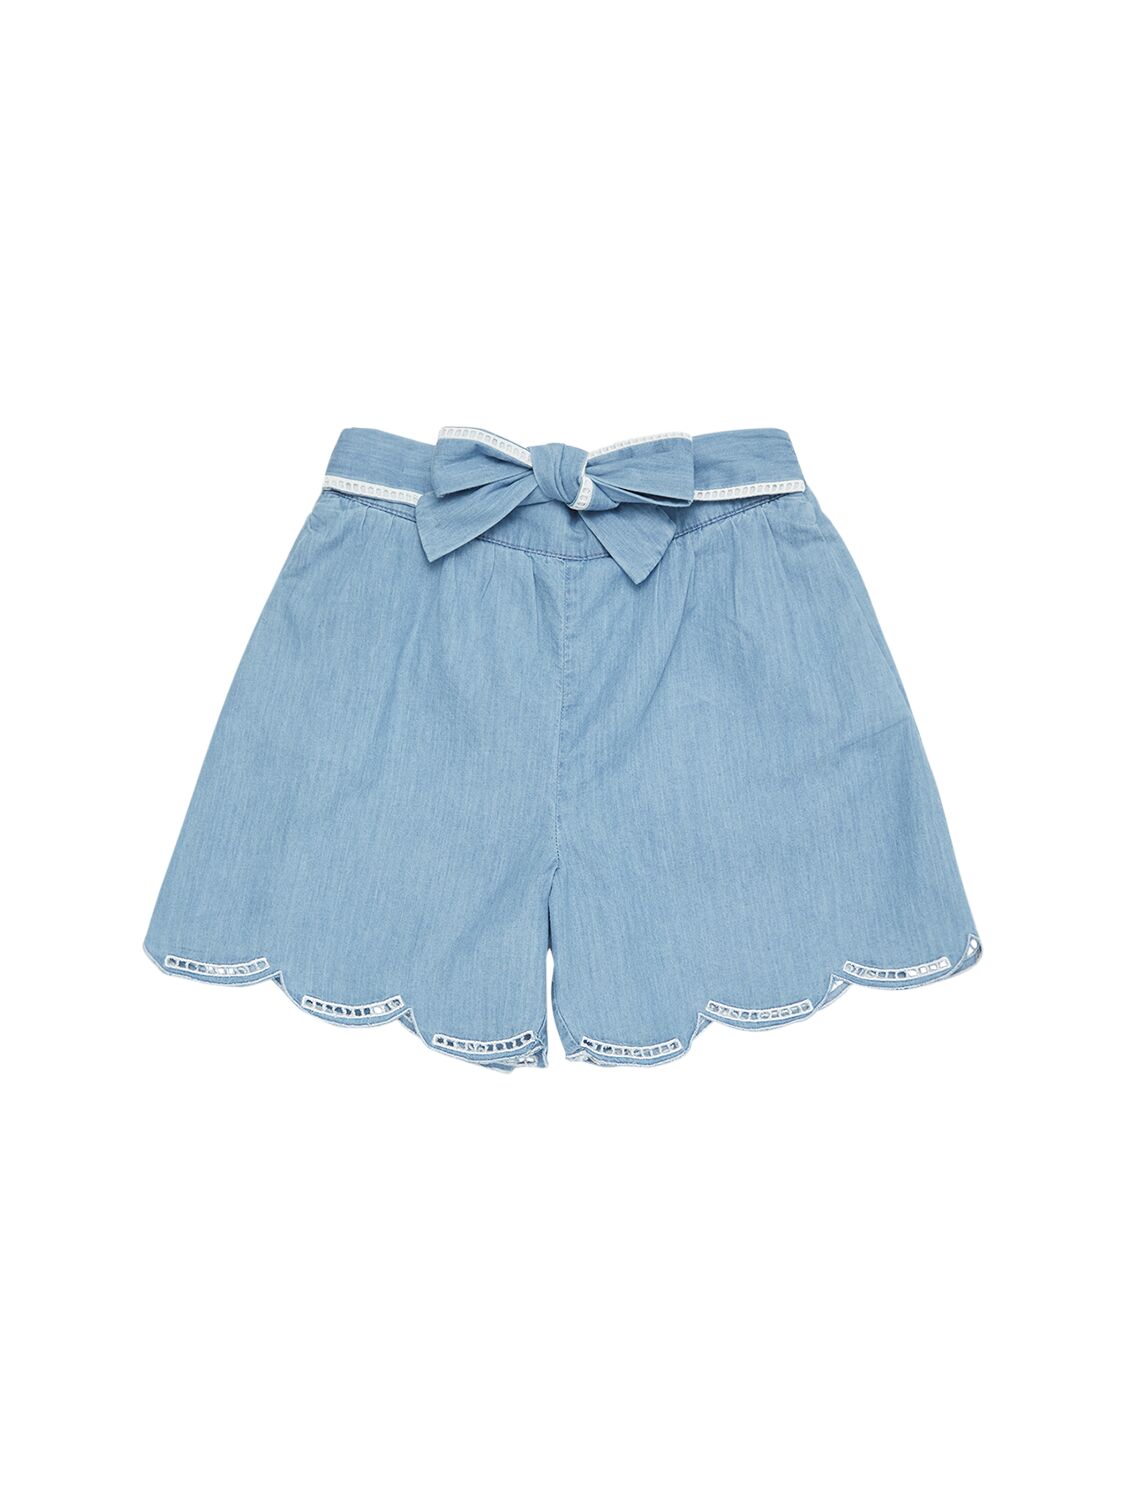 Image of Cotton Shorts W/bow